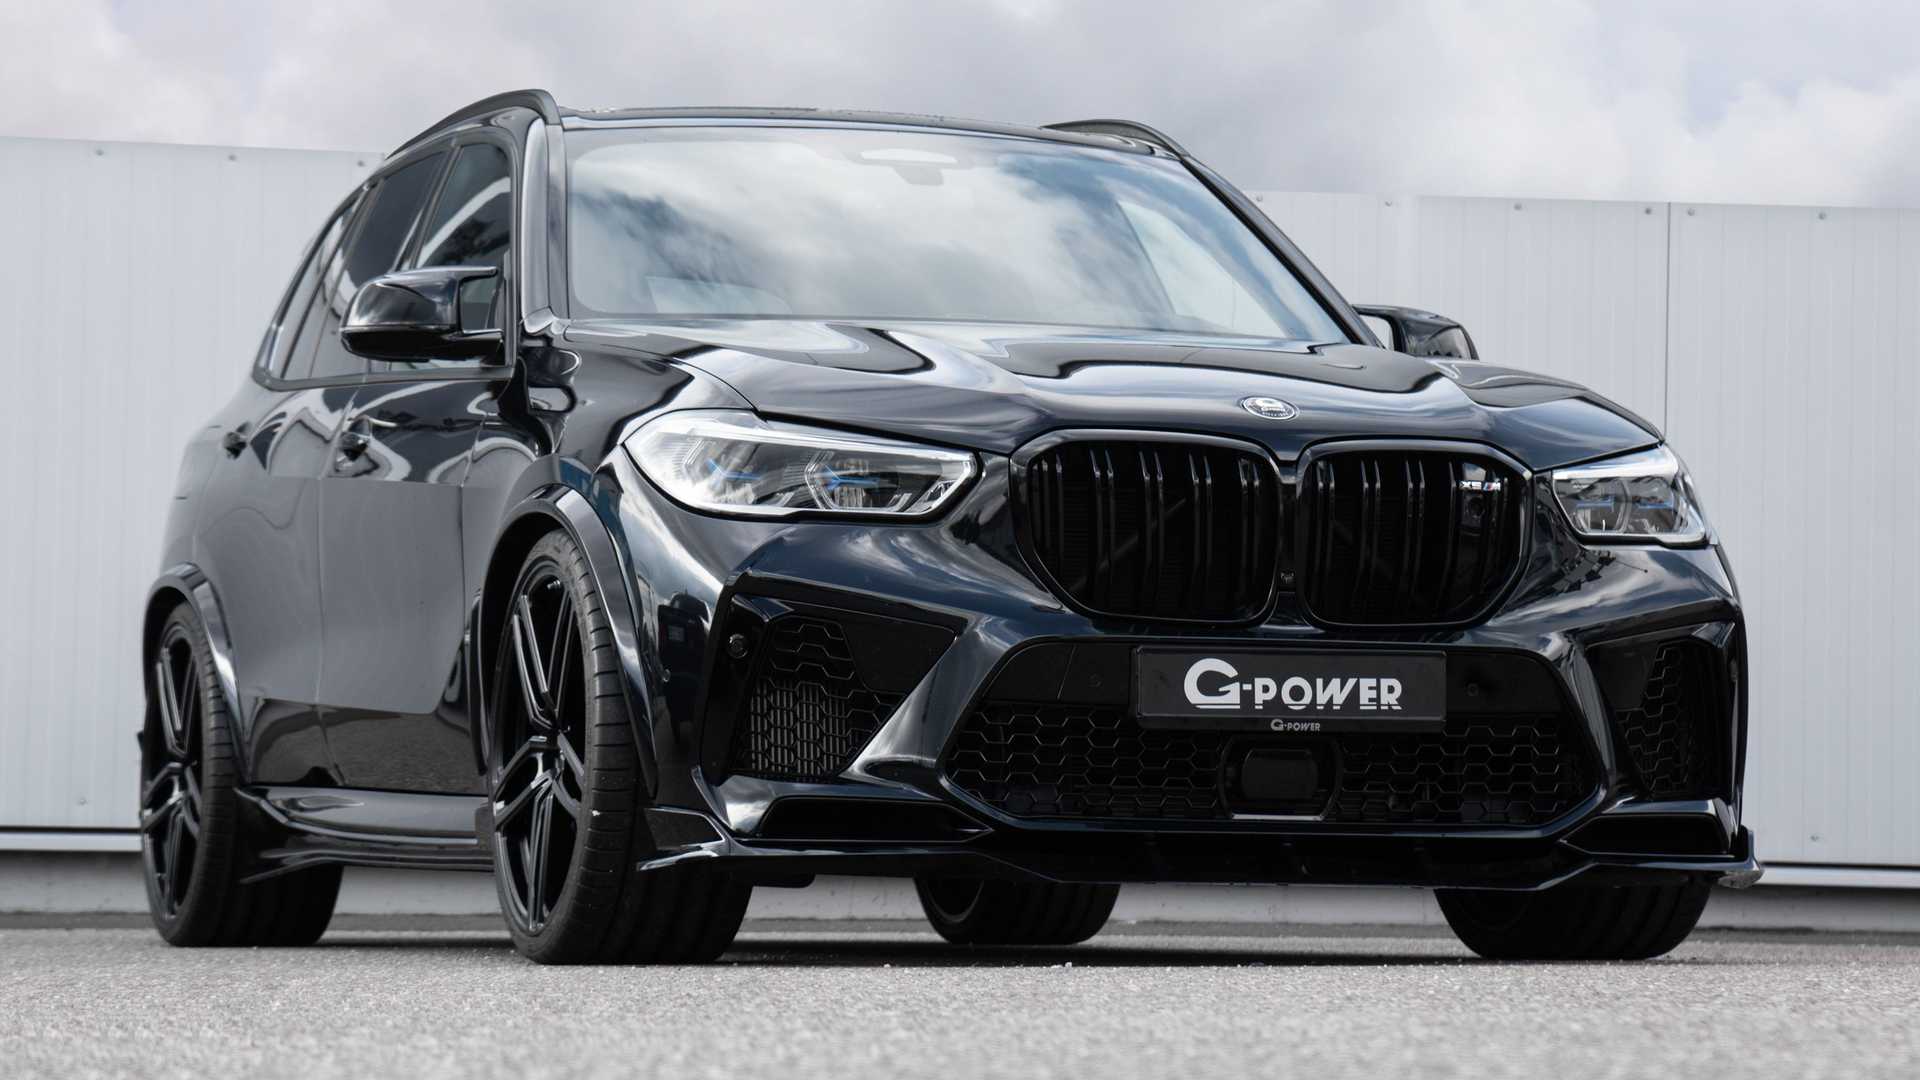 BMW X5 M Makes 800 HP With G-Power Upgrade, Wears Carbon Body Kit